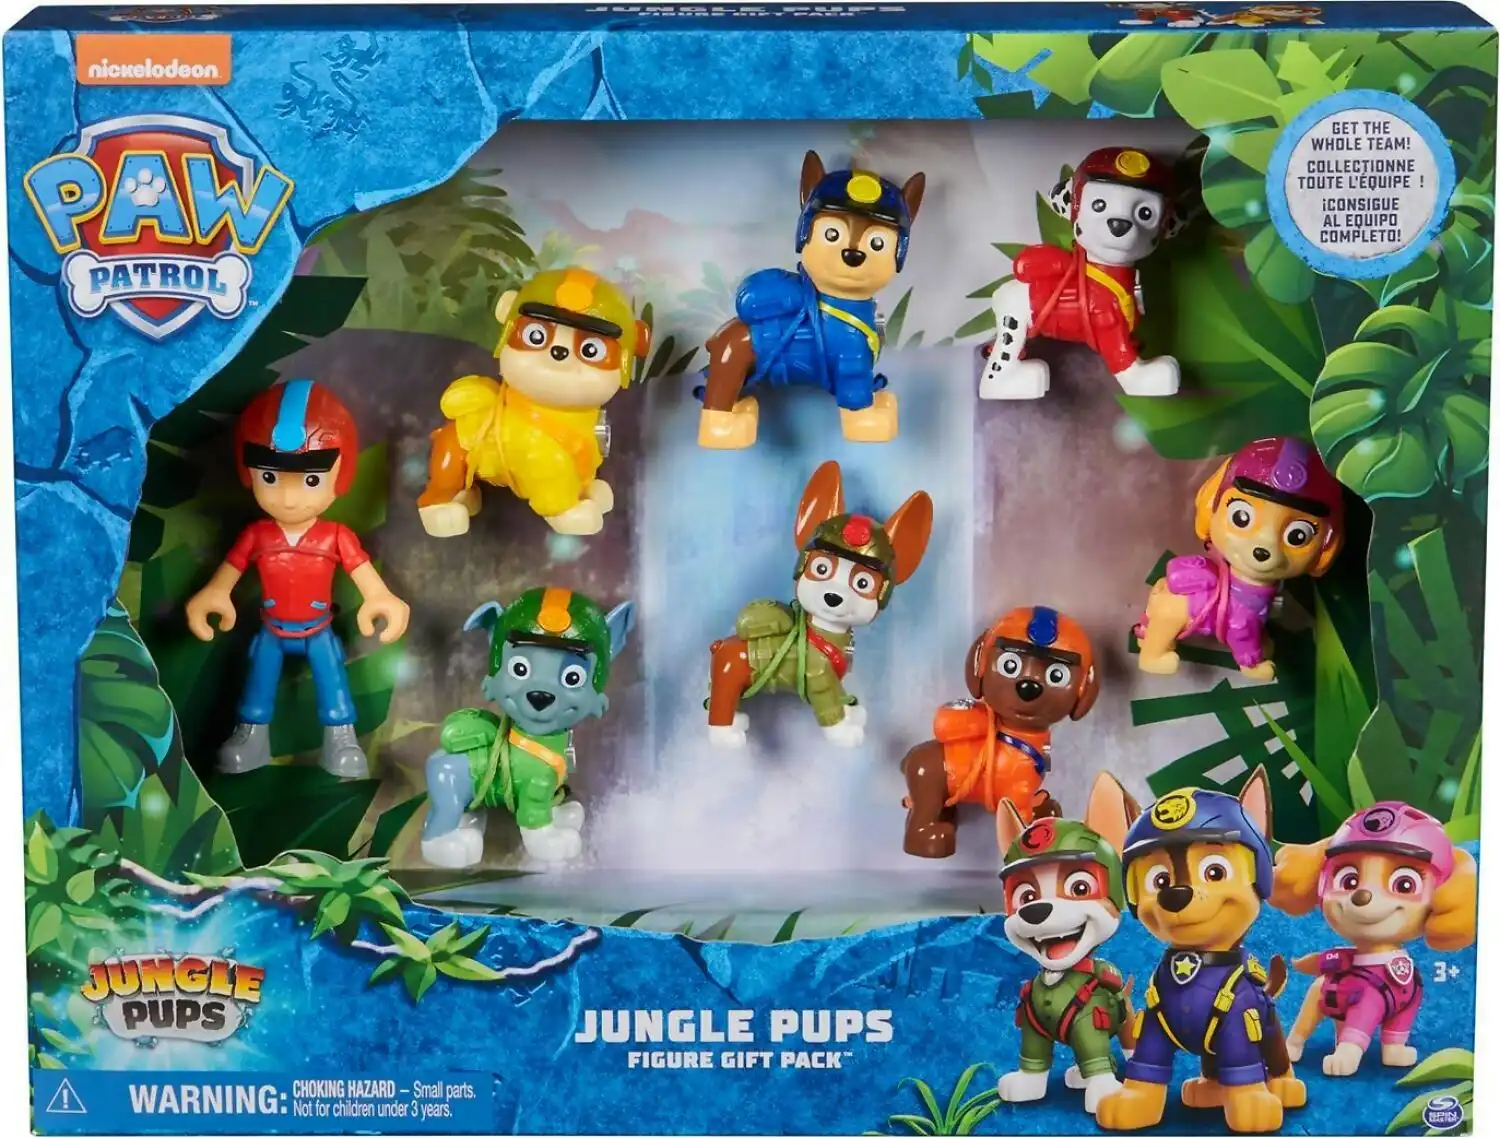 Paw Patrol - Jungle Pups Action Figures Gift Pack - Spin Master